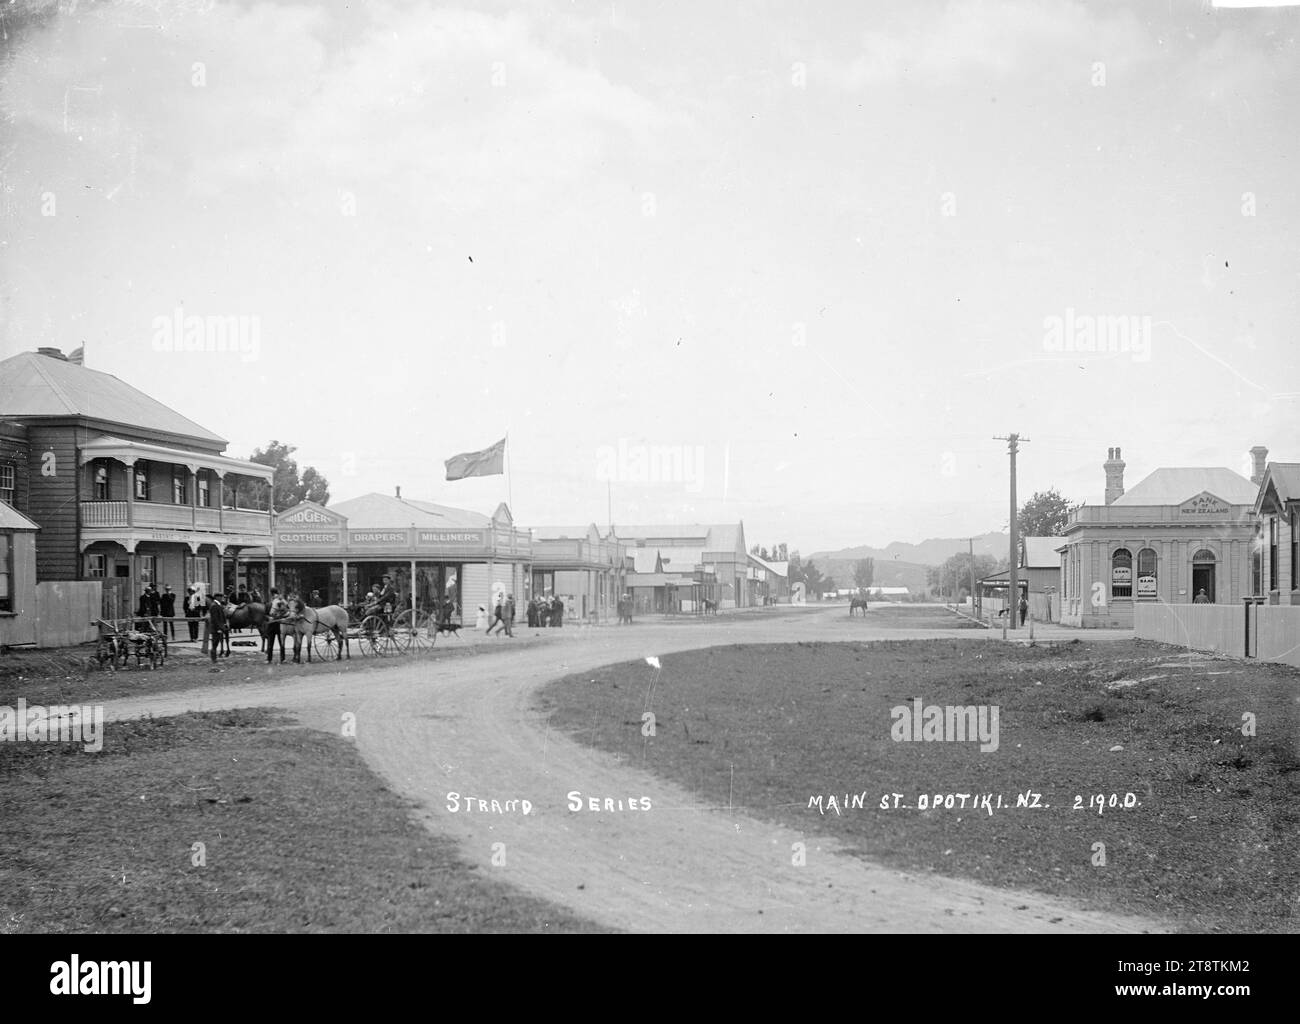 Main Street, Opotiki, View looking down Main Street (now known as Elliot Street) with the Masonic Hotel on the left at intersection with Church Street; on the opposite corner are the premises of Bridgers Ltd (drapers); across the road on the opposite corner is the Bank of New Zealand. A horse and carriage is outside the Masonic Hotel. in early 1900s Stock Photo